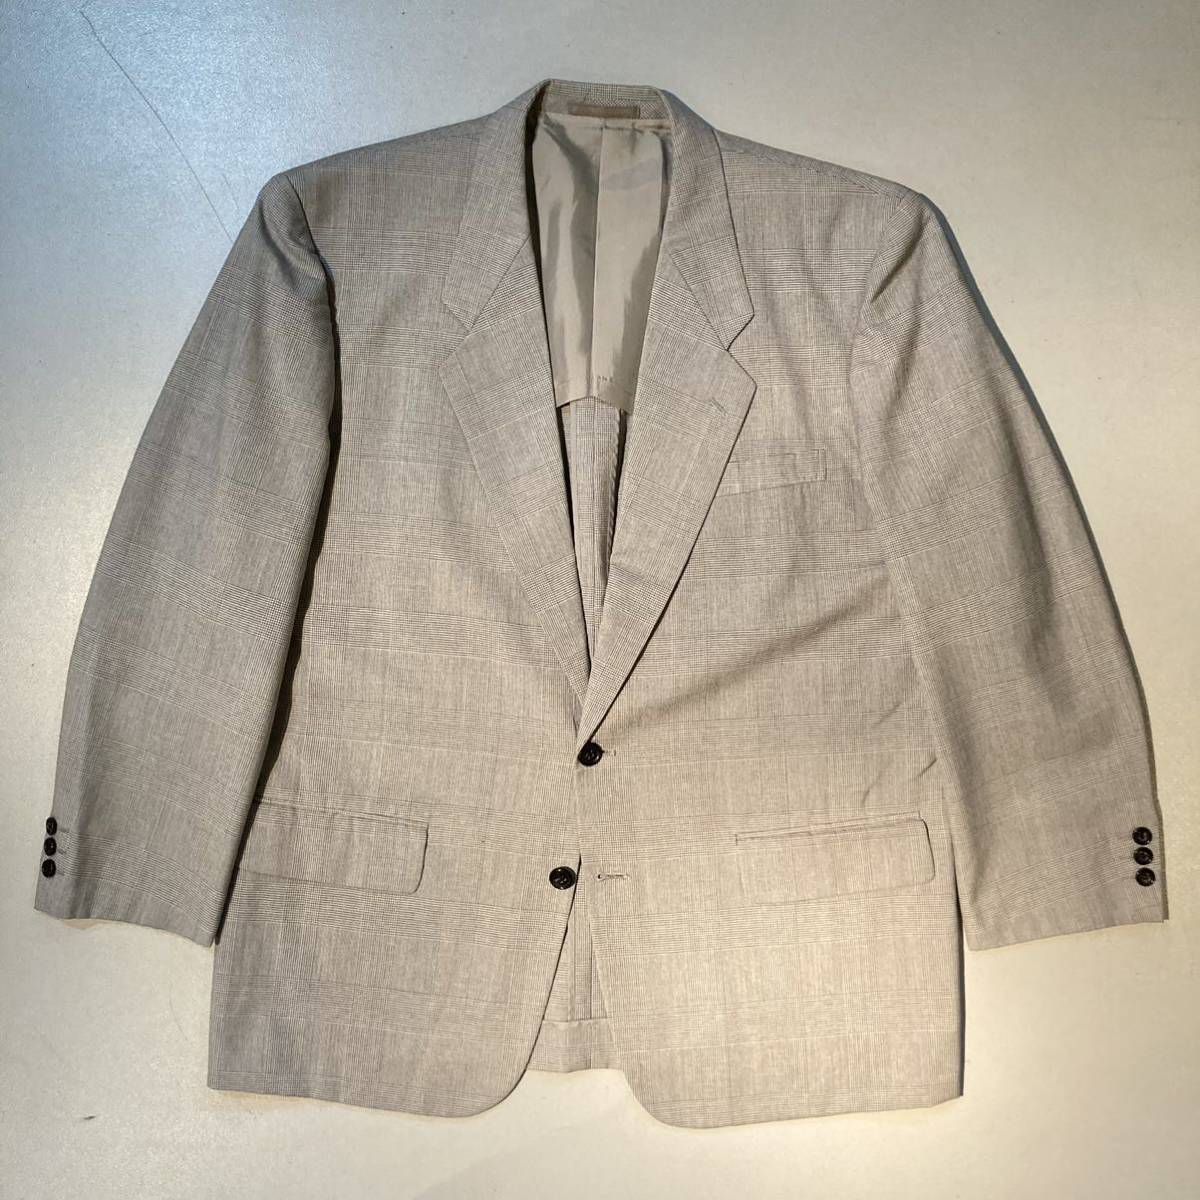 AD1990 COMME des GARCONS HOMME tailored jacket 「グレンチェック」 1990A/Wシーズンテーマ「大人の不良」